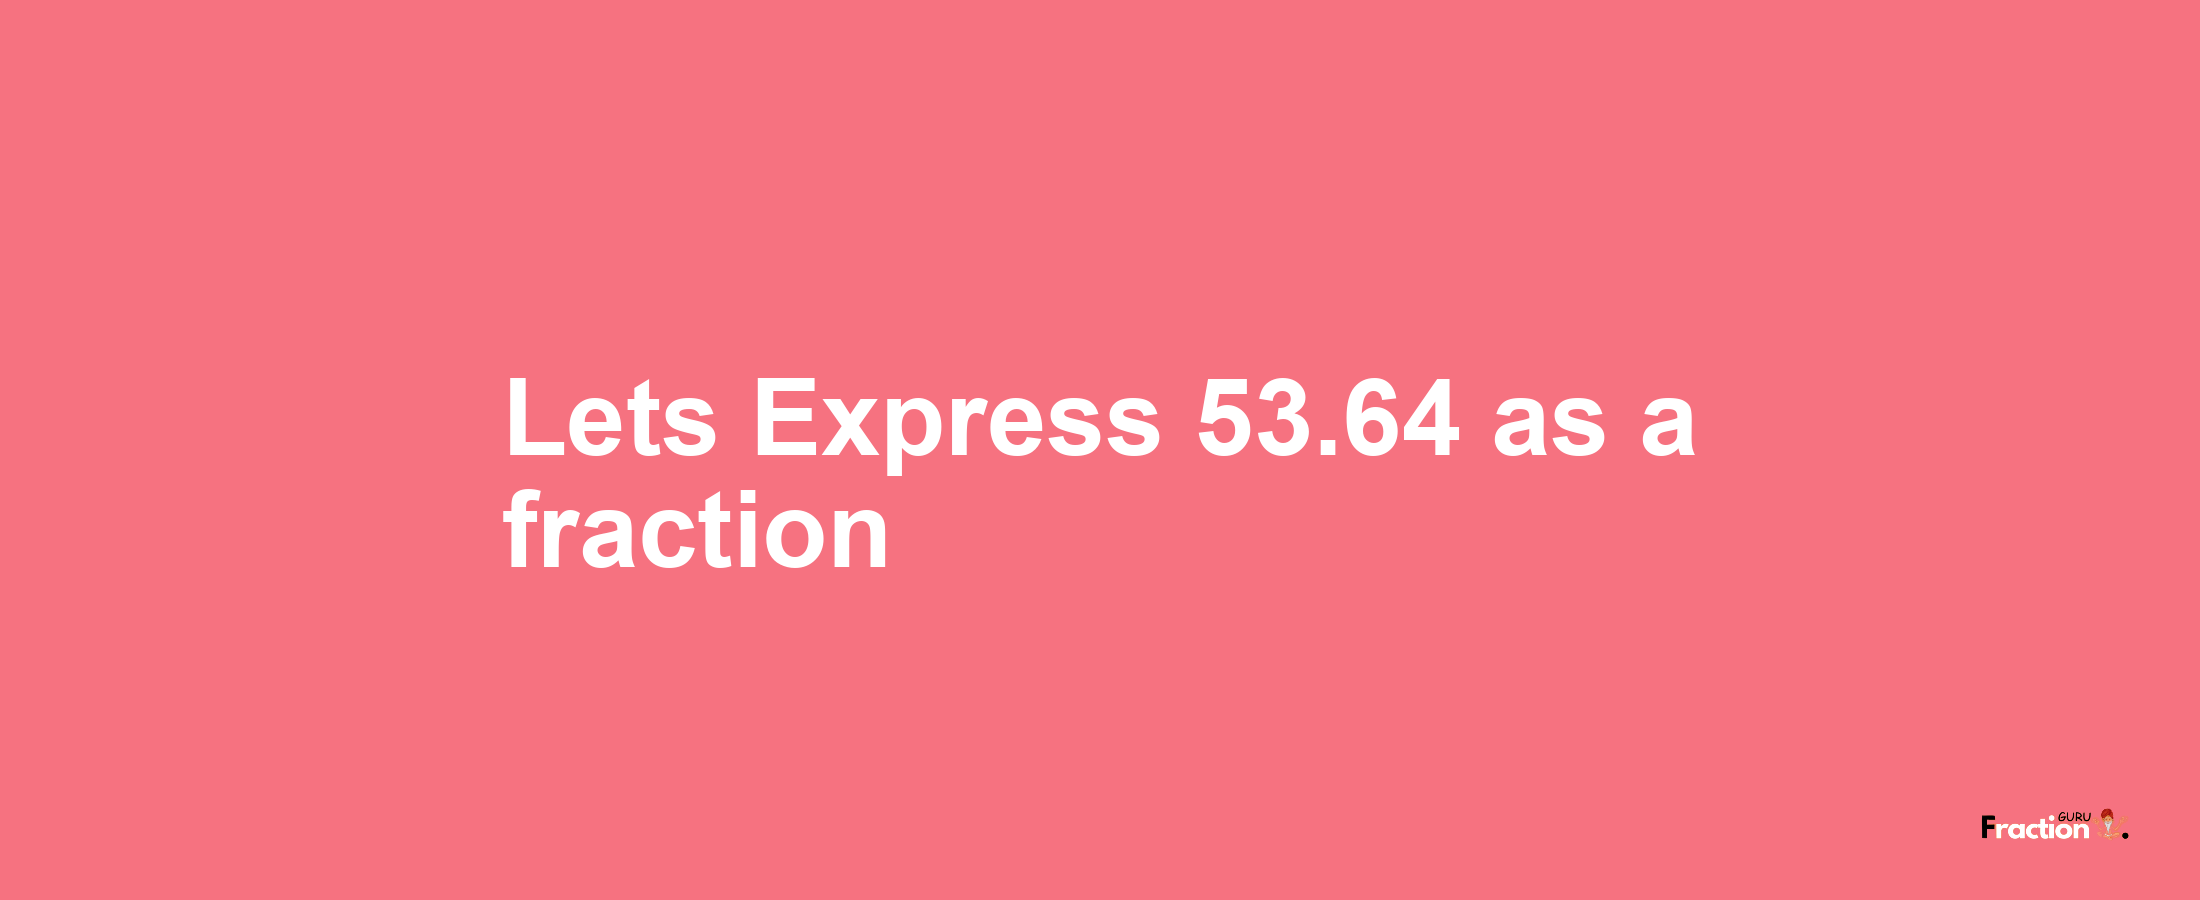 Lets Express 53.64 as afraction